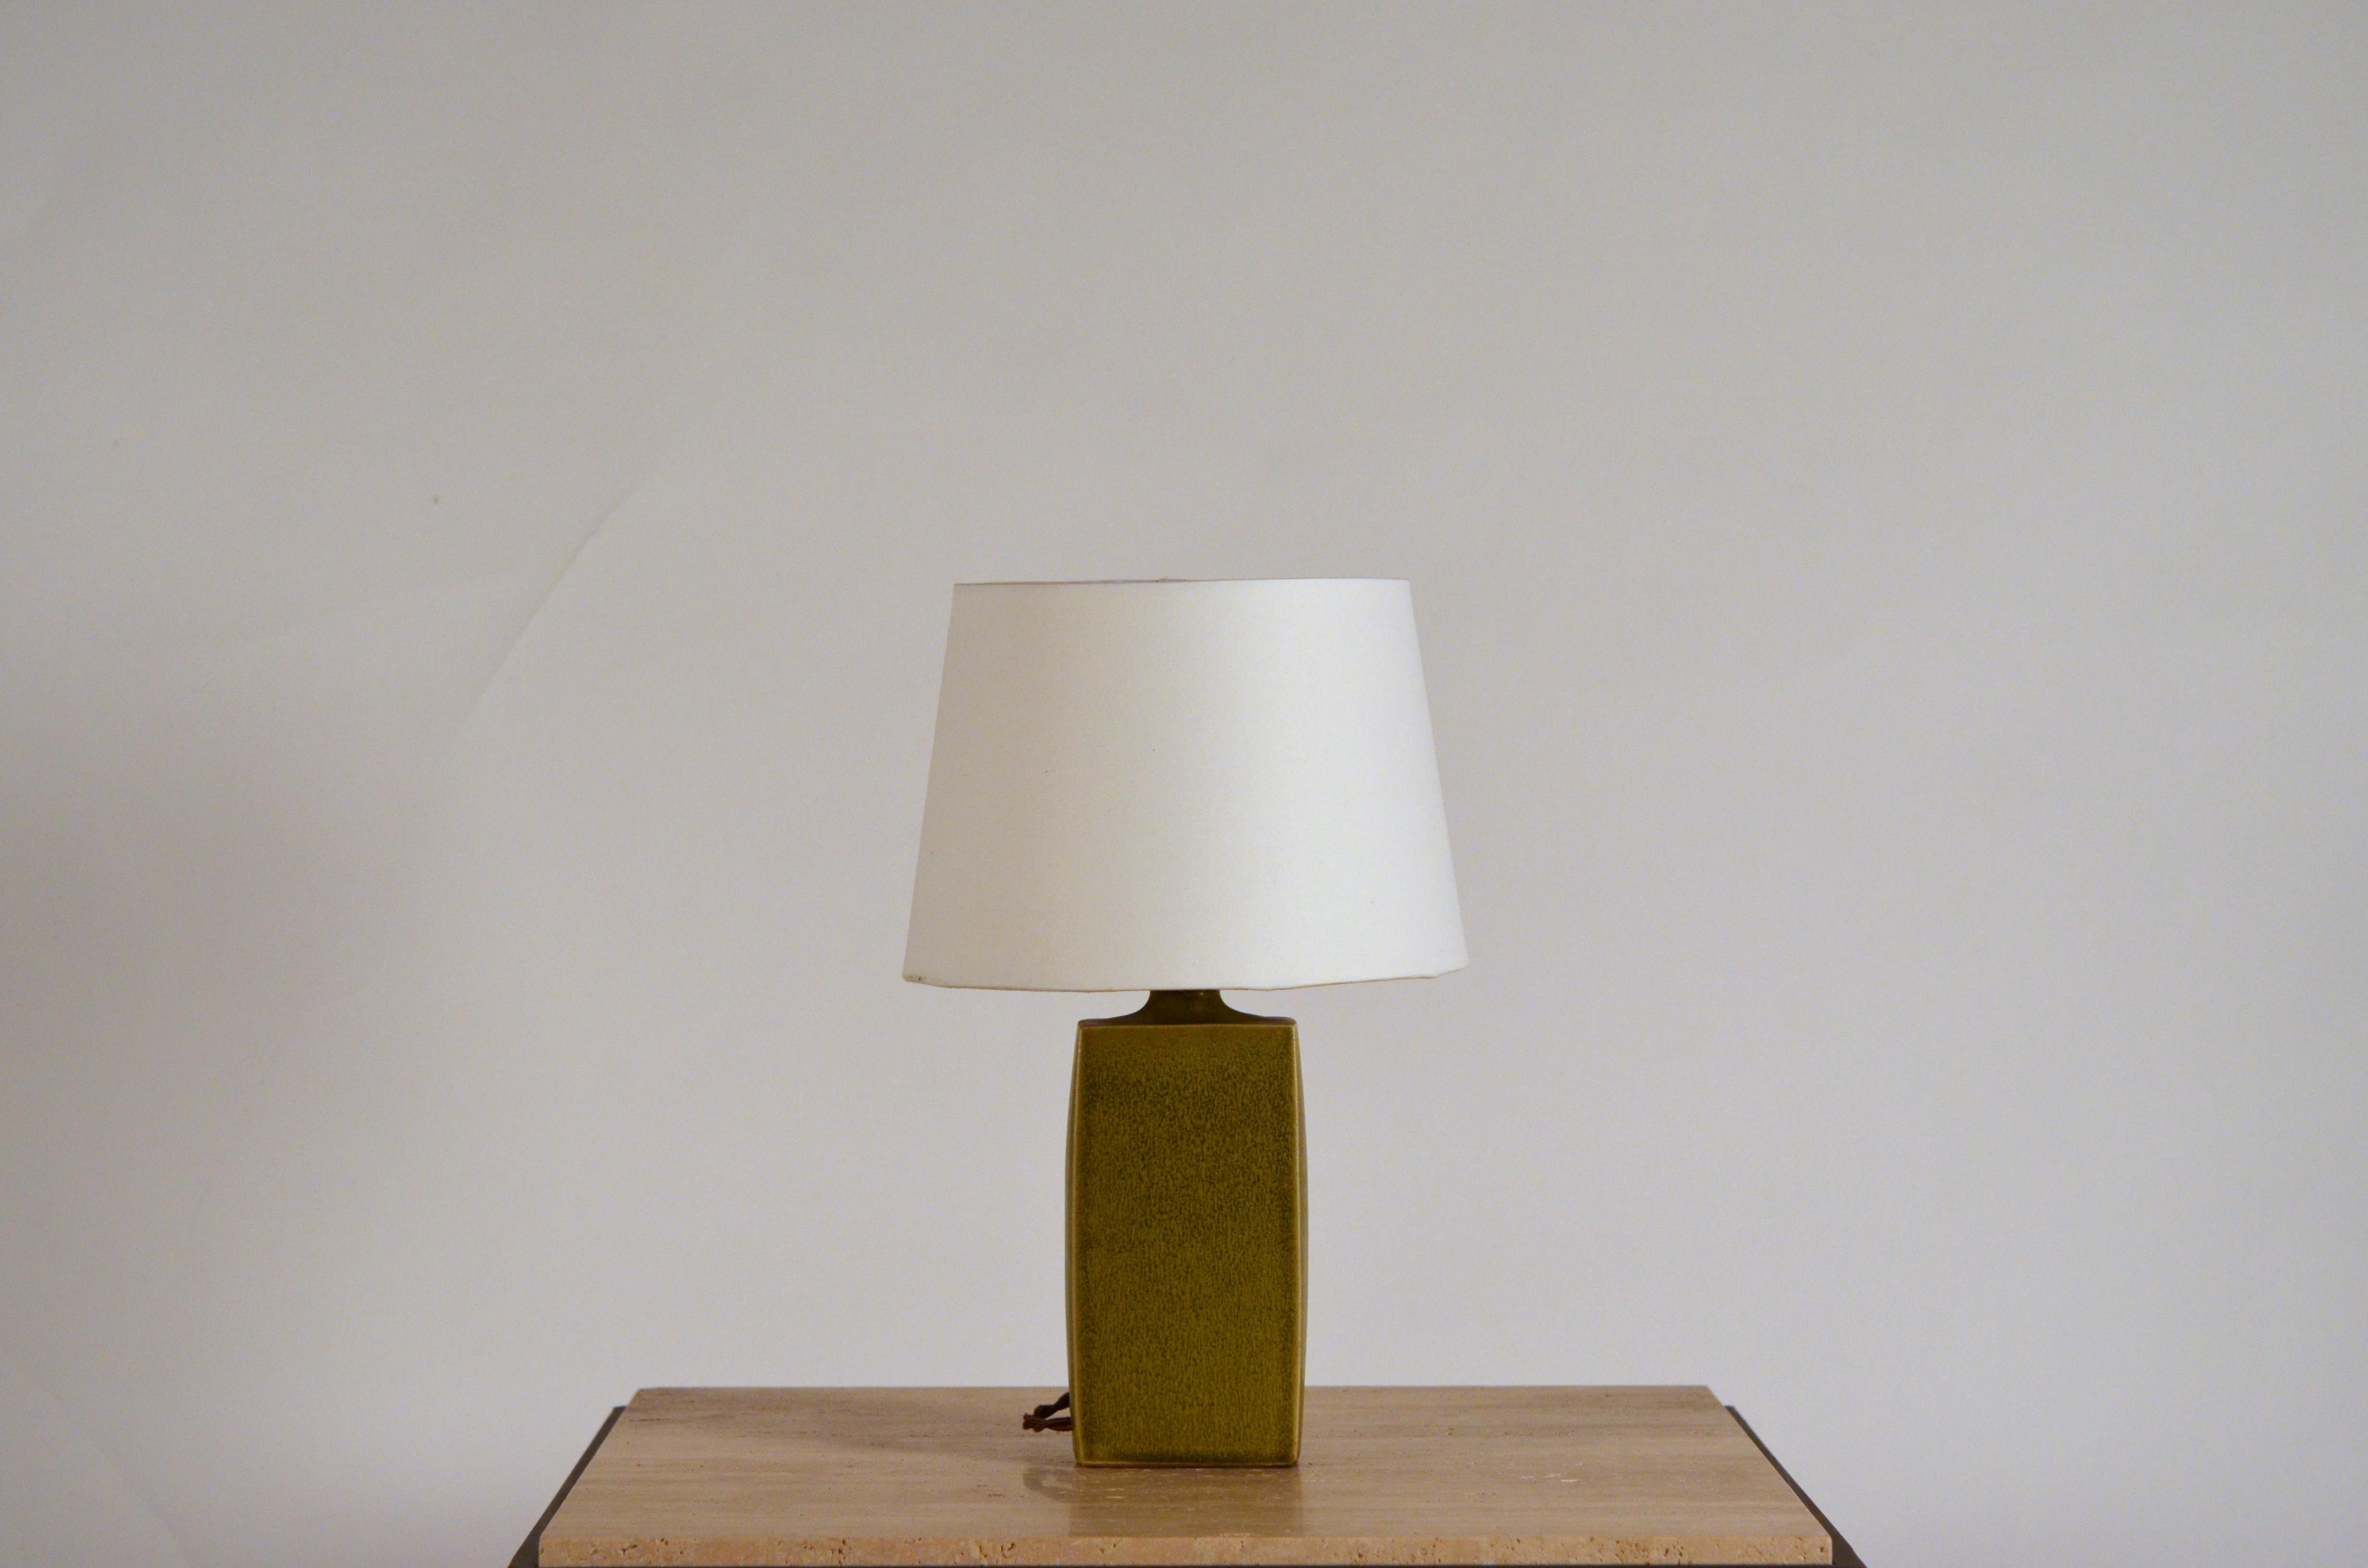 Chic glazed ceramic lamp with parchment shade. Very simple and elegant.

Attractive European style shade mount with no apparent harp or final.

The dimensions are the overall dimensions of the lamp and the shade together. The shade is 10 in.